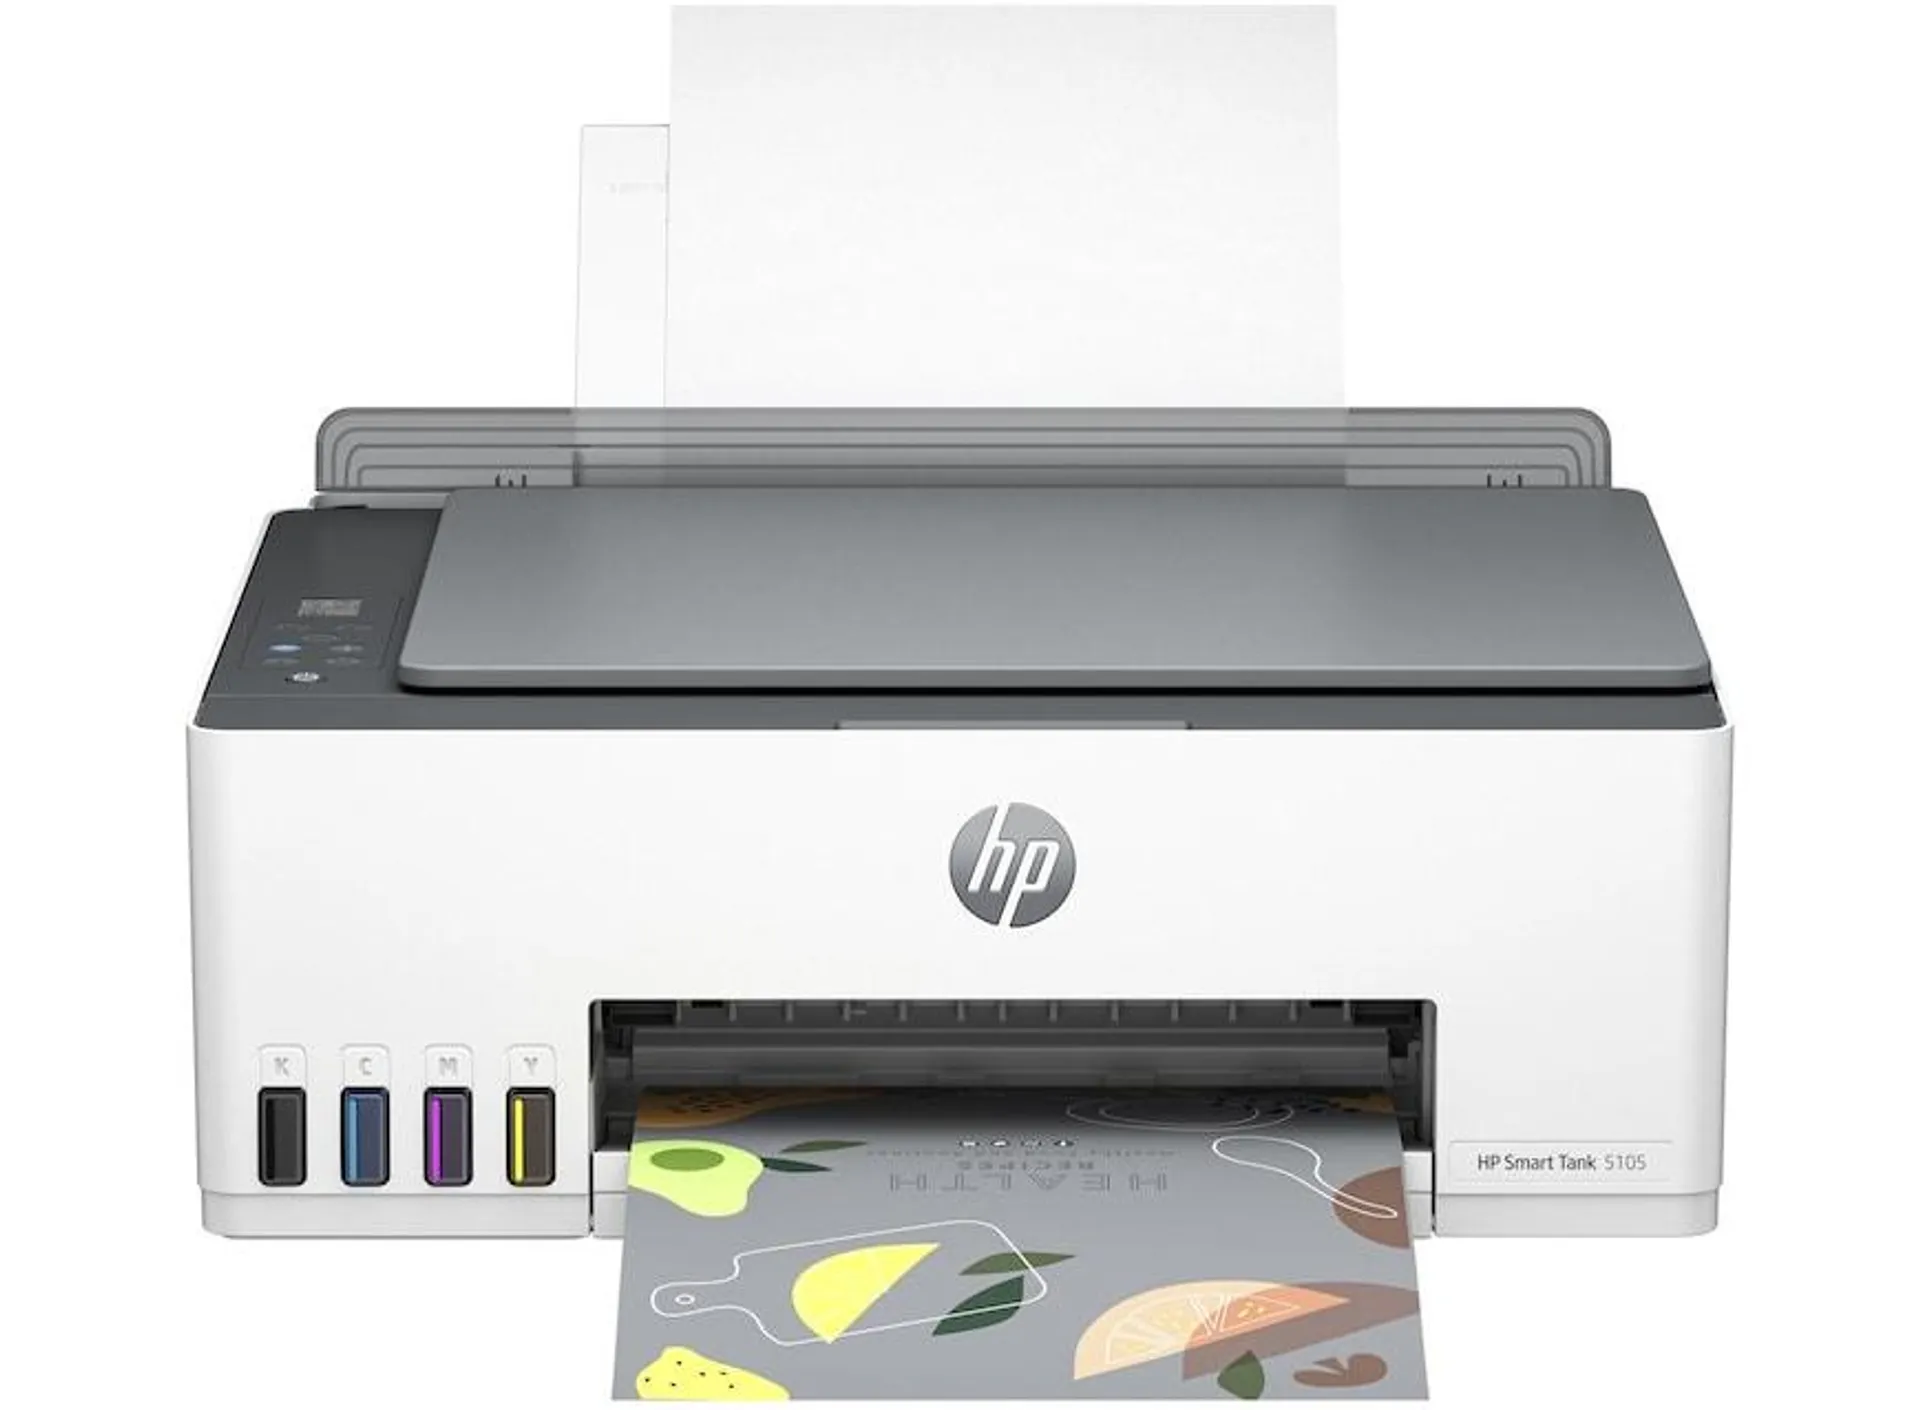 HP Smart Tank 5105 Wireless All-in-One Colour Printer